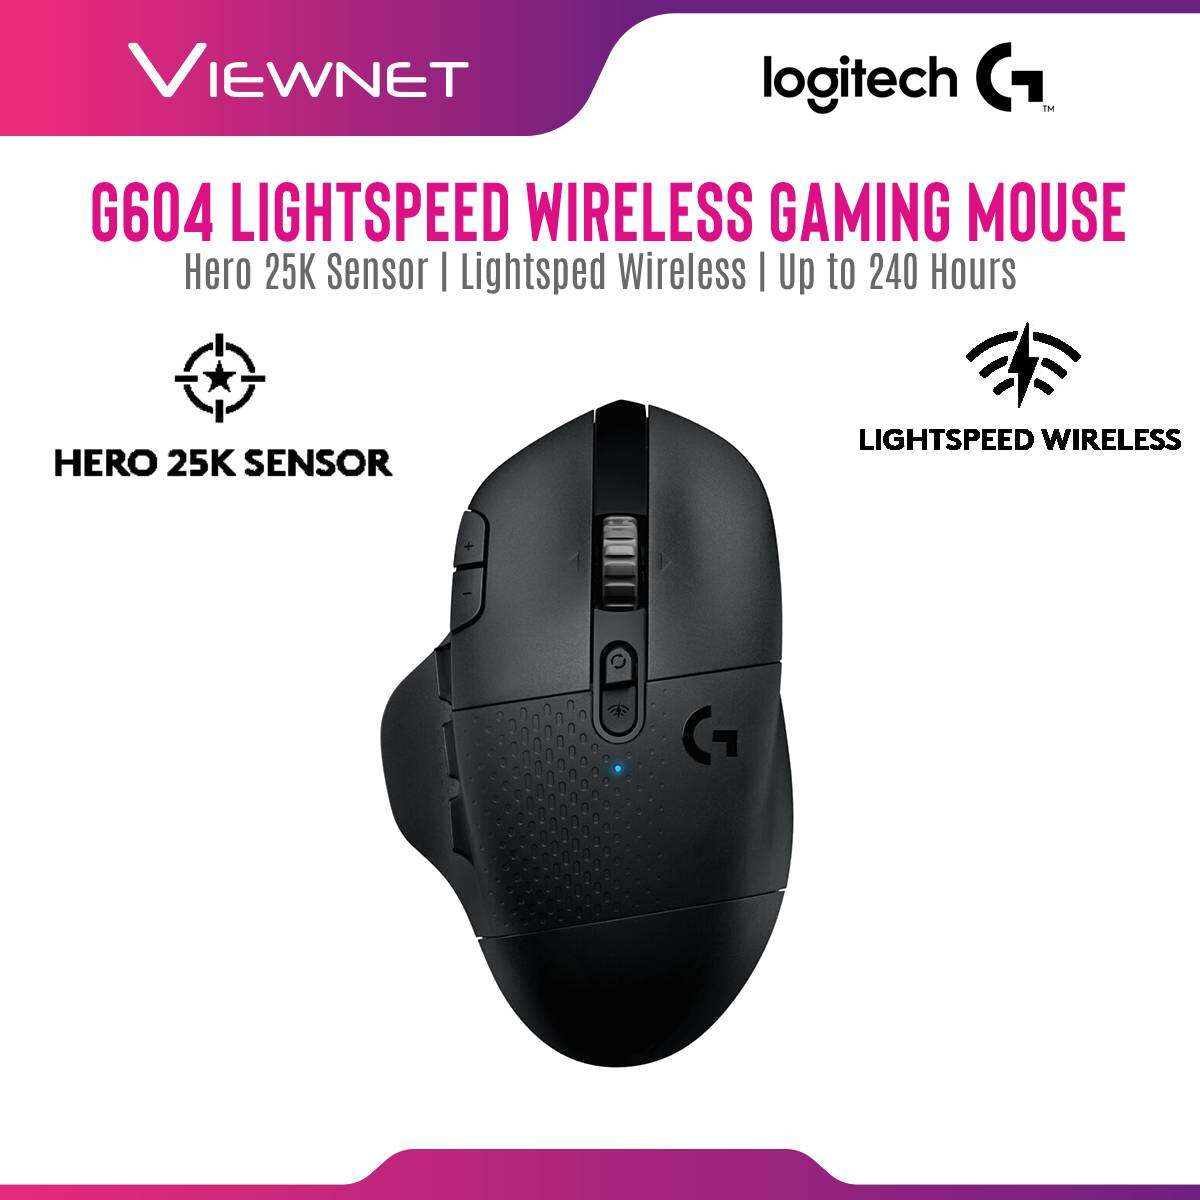 Logitech G604 Lightspeed Wireless Gaming Mouse with Hero 25K Sensor, 15 Programmable Controls, Dual Connectivity with Lightspeed, Up To 240 Hours